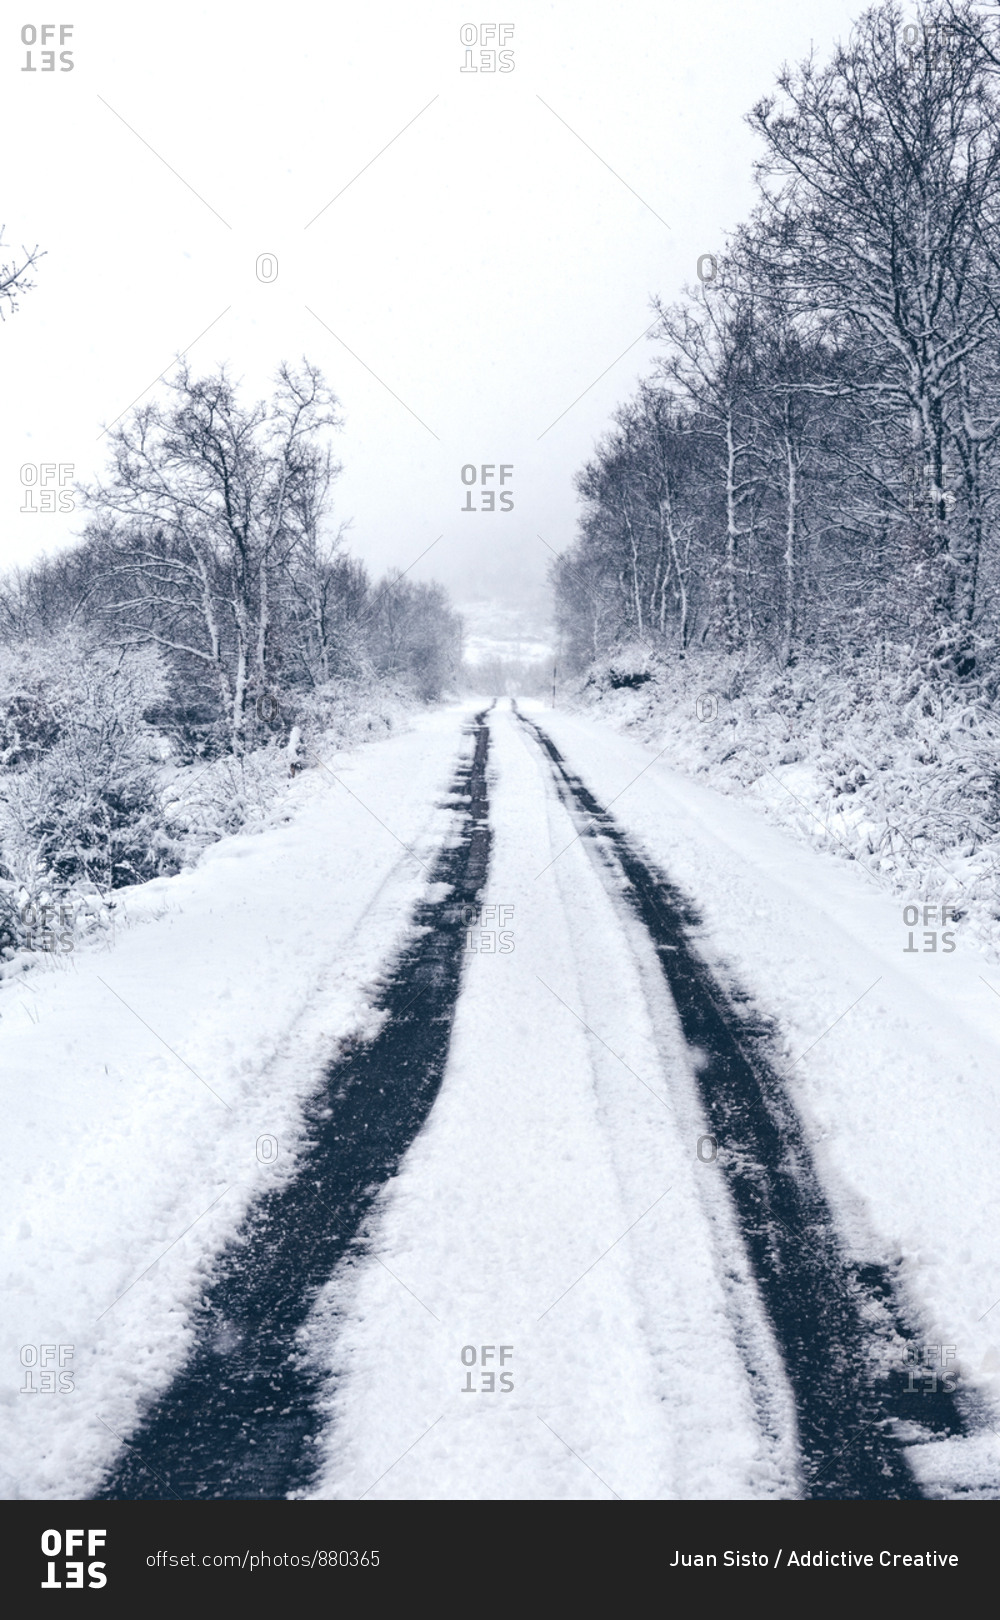 Snow covered empty country road with traces of cars leading away and forest along roadway in cloudy gloomy winter day